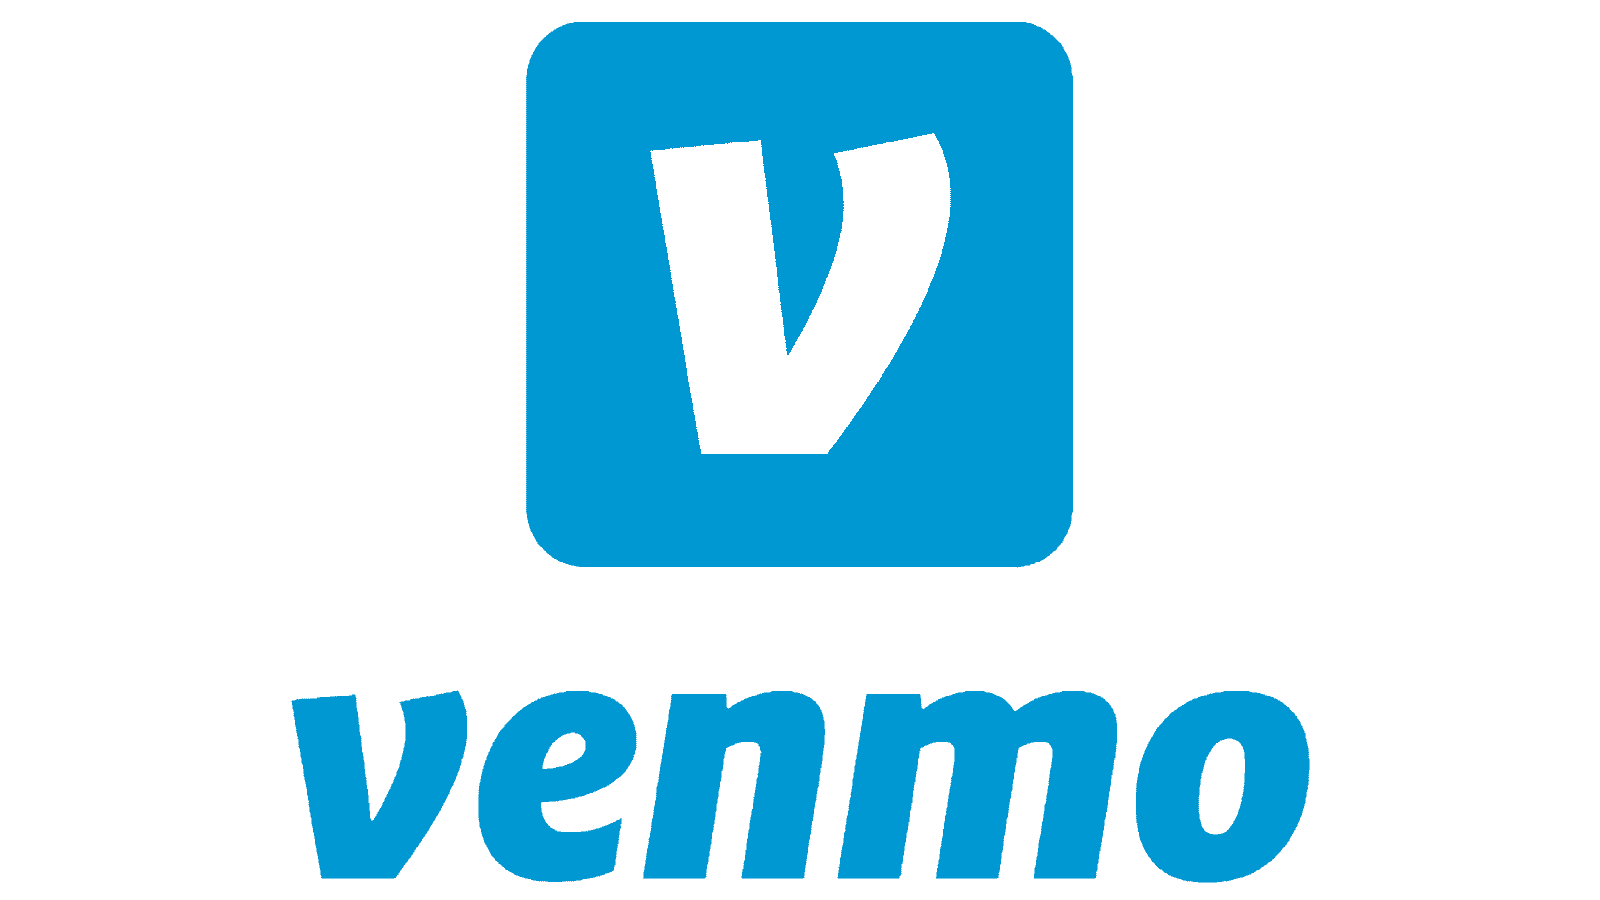 How to Unfreeze your Venmo Account, Tips to Avoid being Frozen